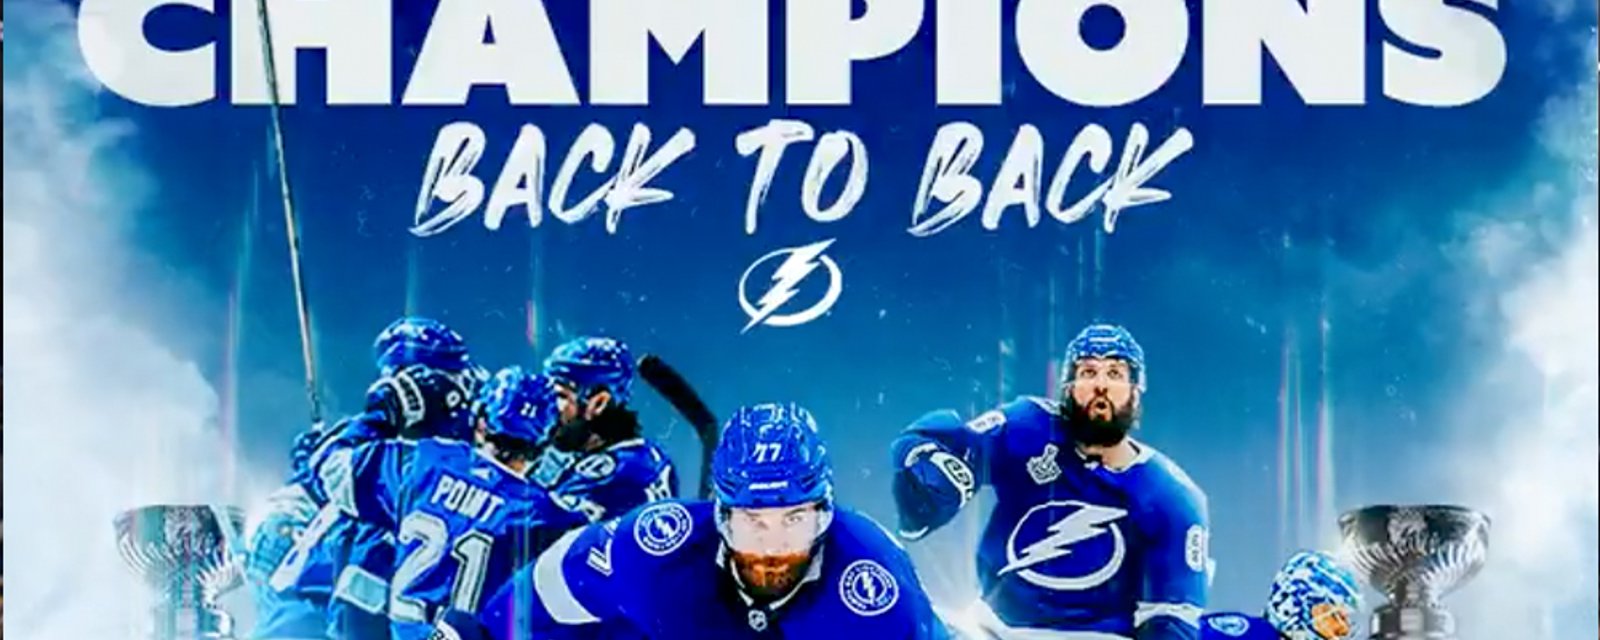 Lightning defeat Canadiens in Game 5 to win back-to-back Stanley Cup championships! 